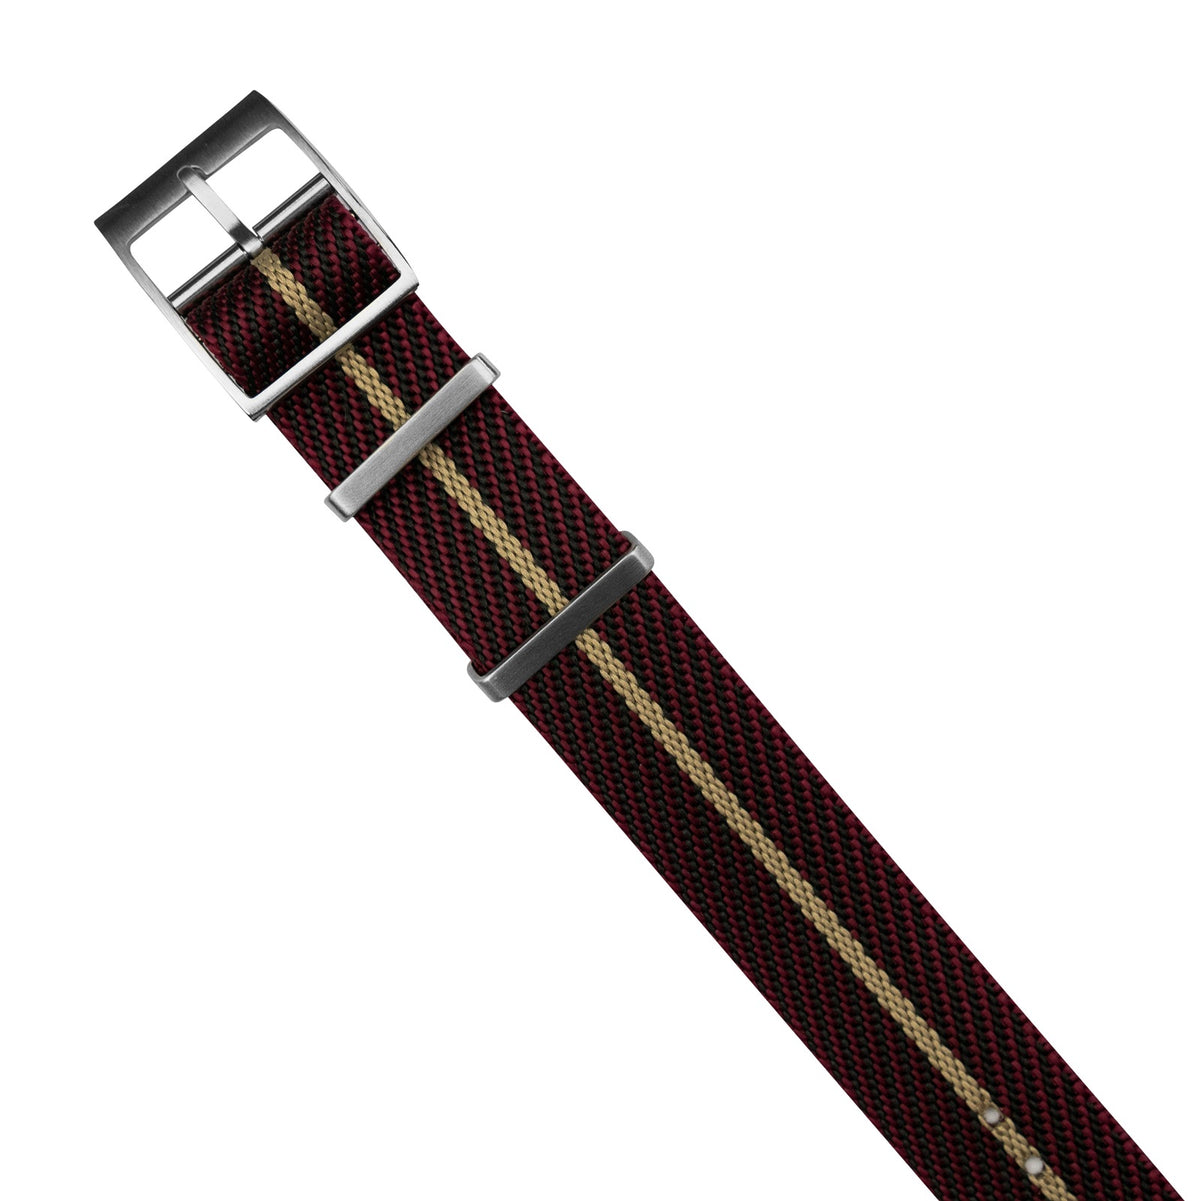 Lux Single Pass Strap in Burgundy Sand with Silver Buckle (20mm) - Nomad Watch Works SG